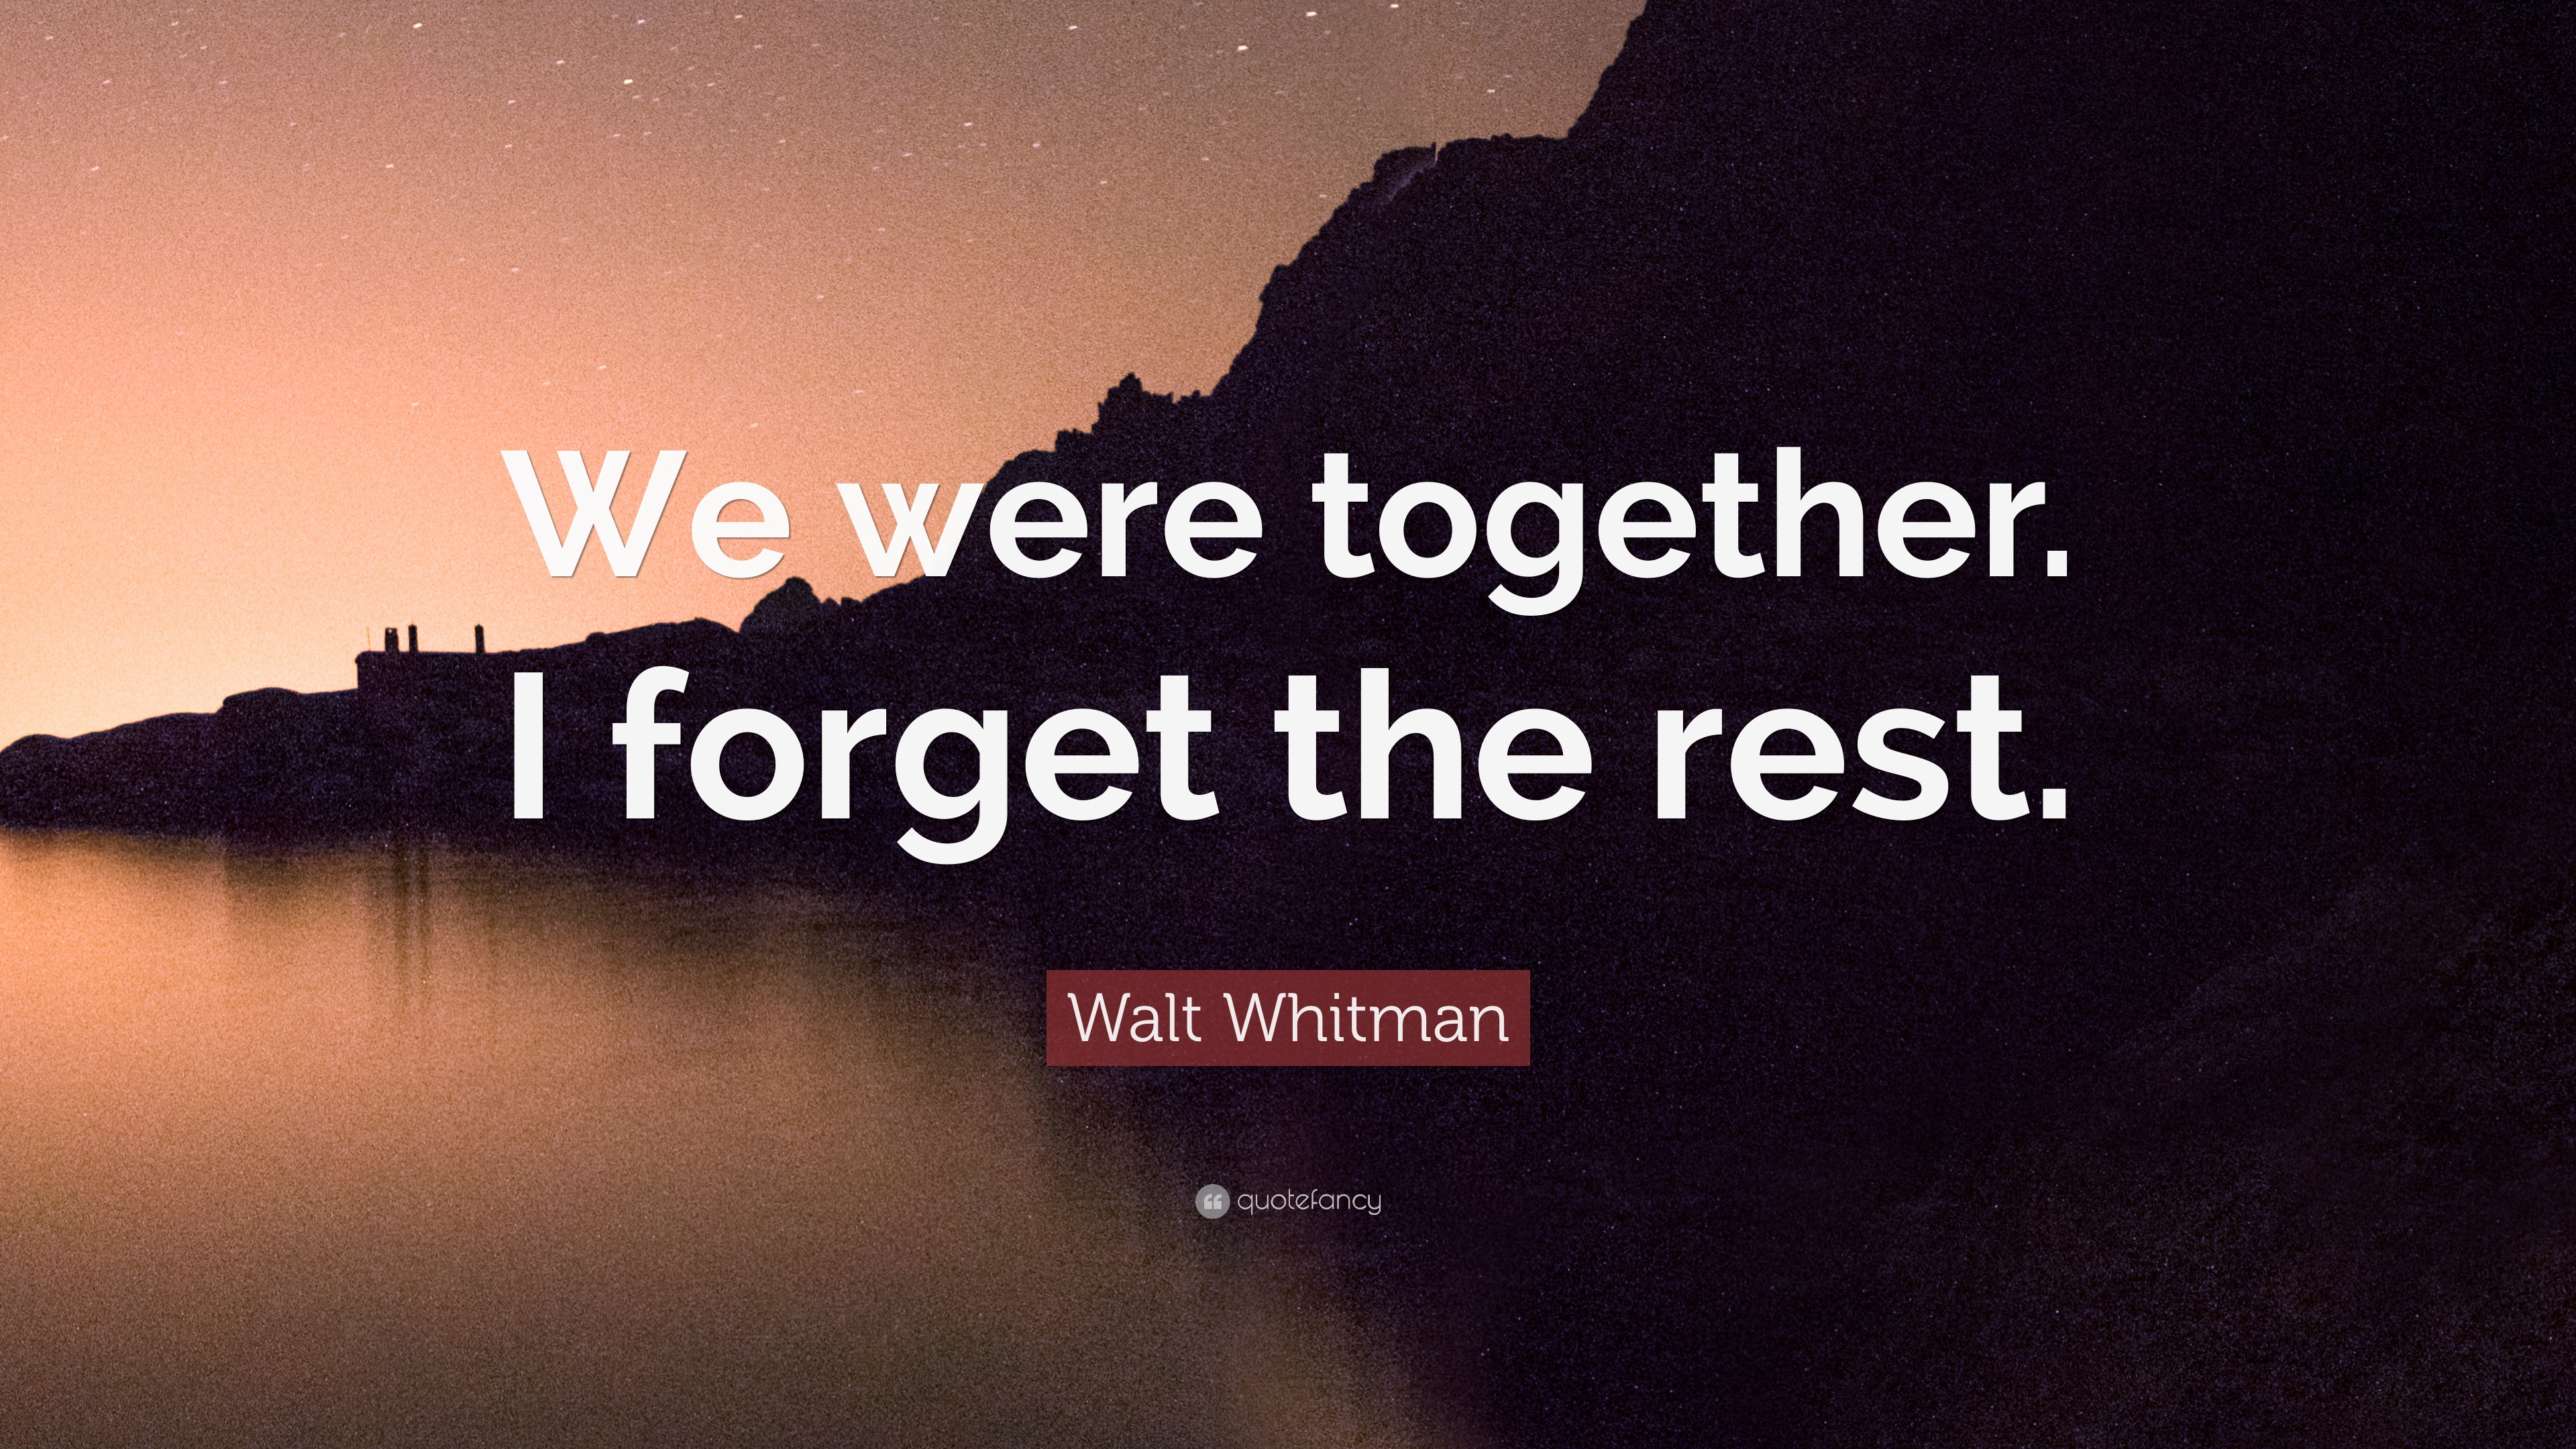 Walt Whitman Quote “We were together. I the rest